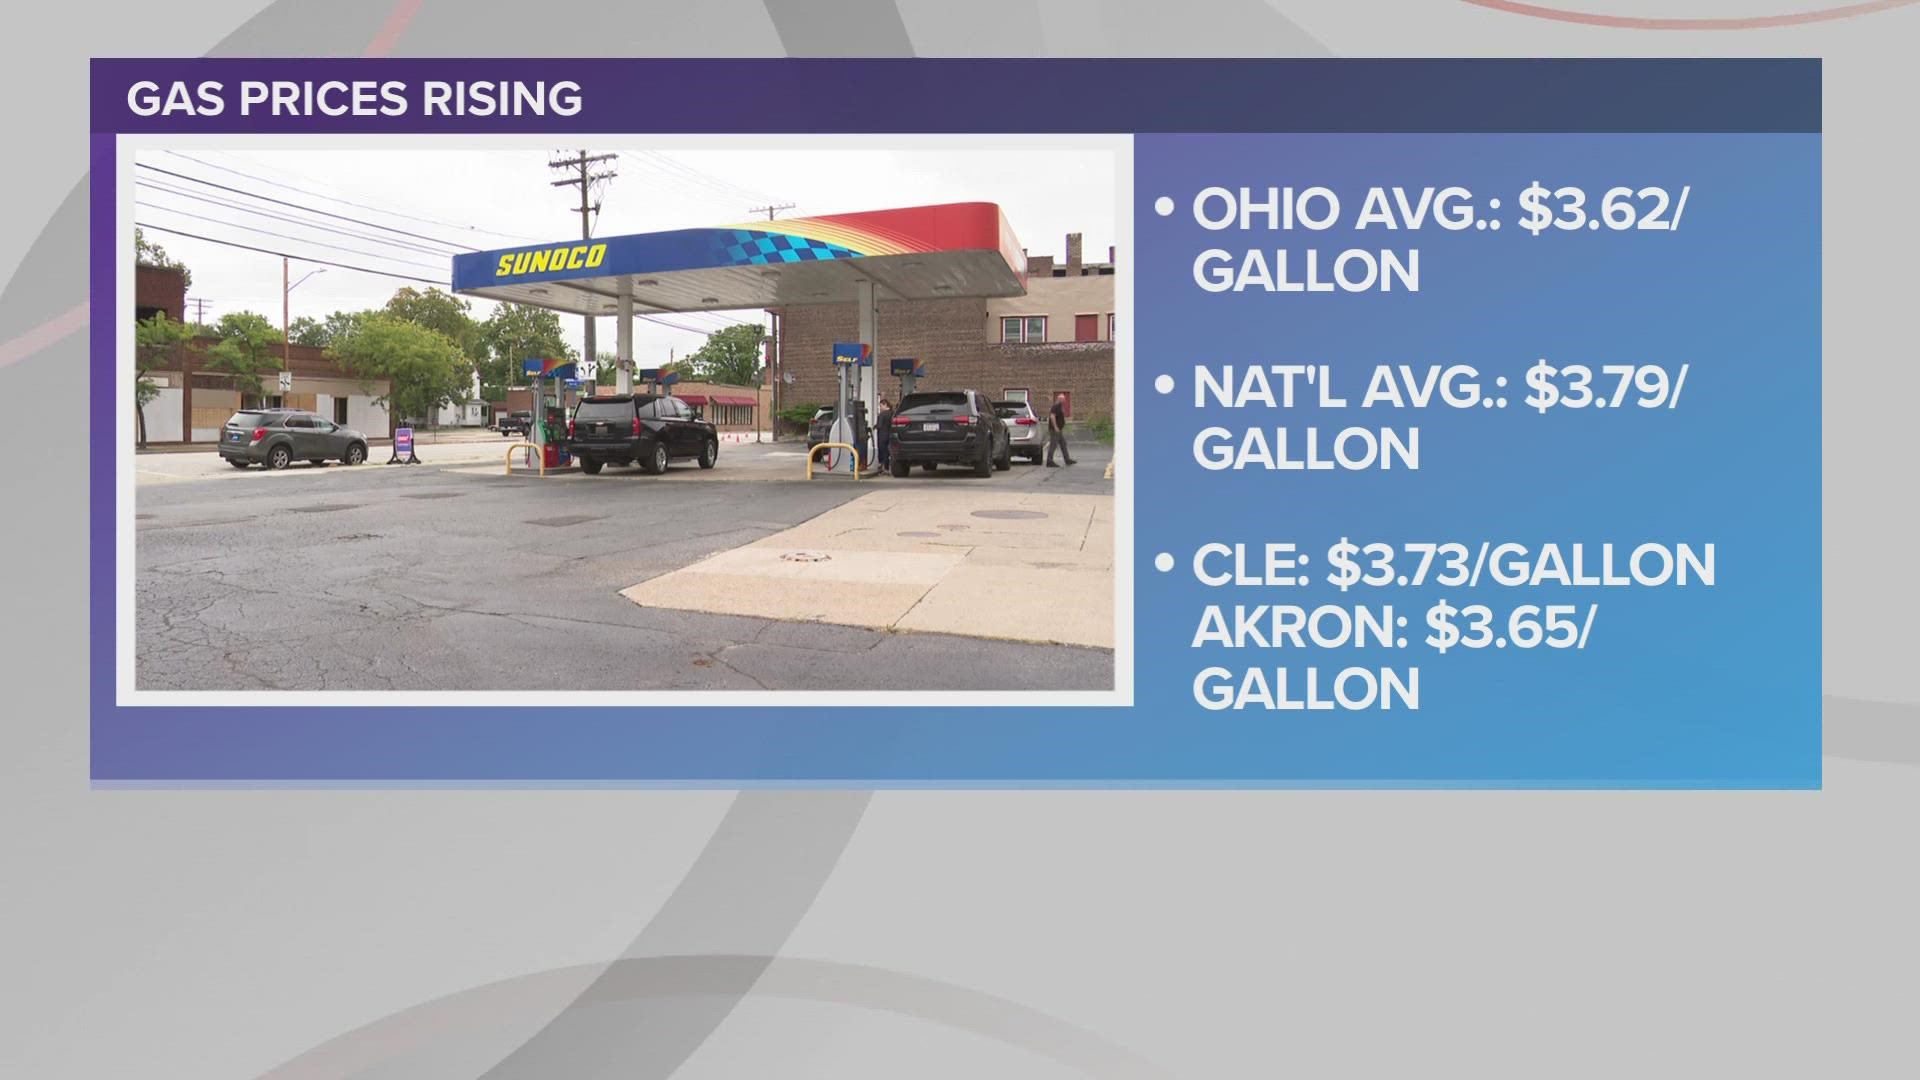 The average price in Cleveland is now listed at $3.70 per gallon.